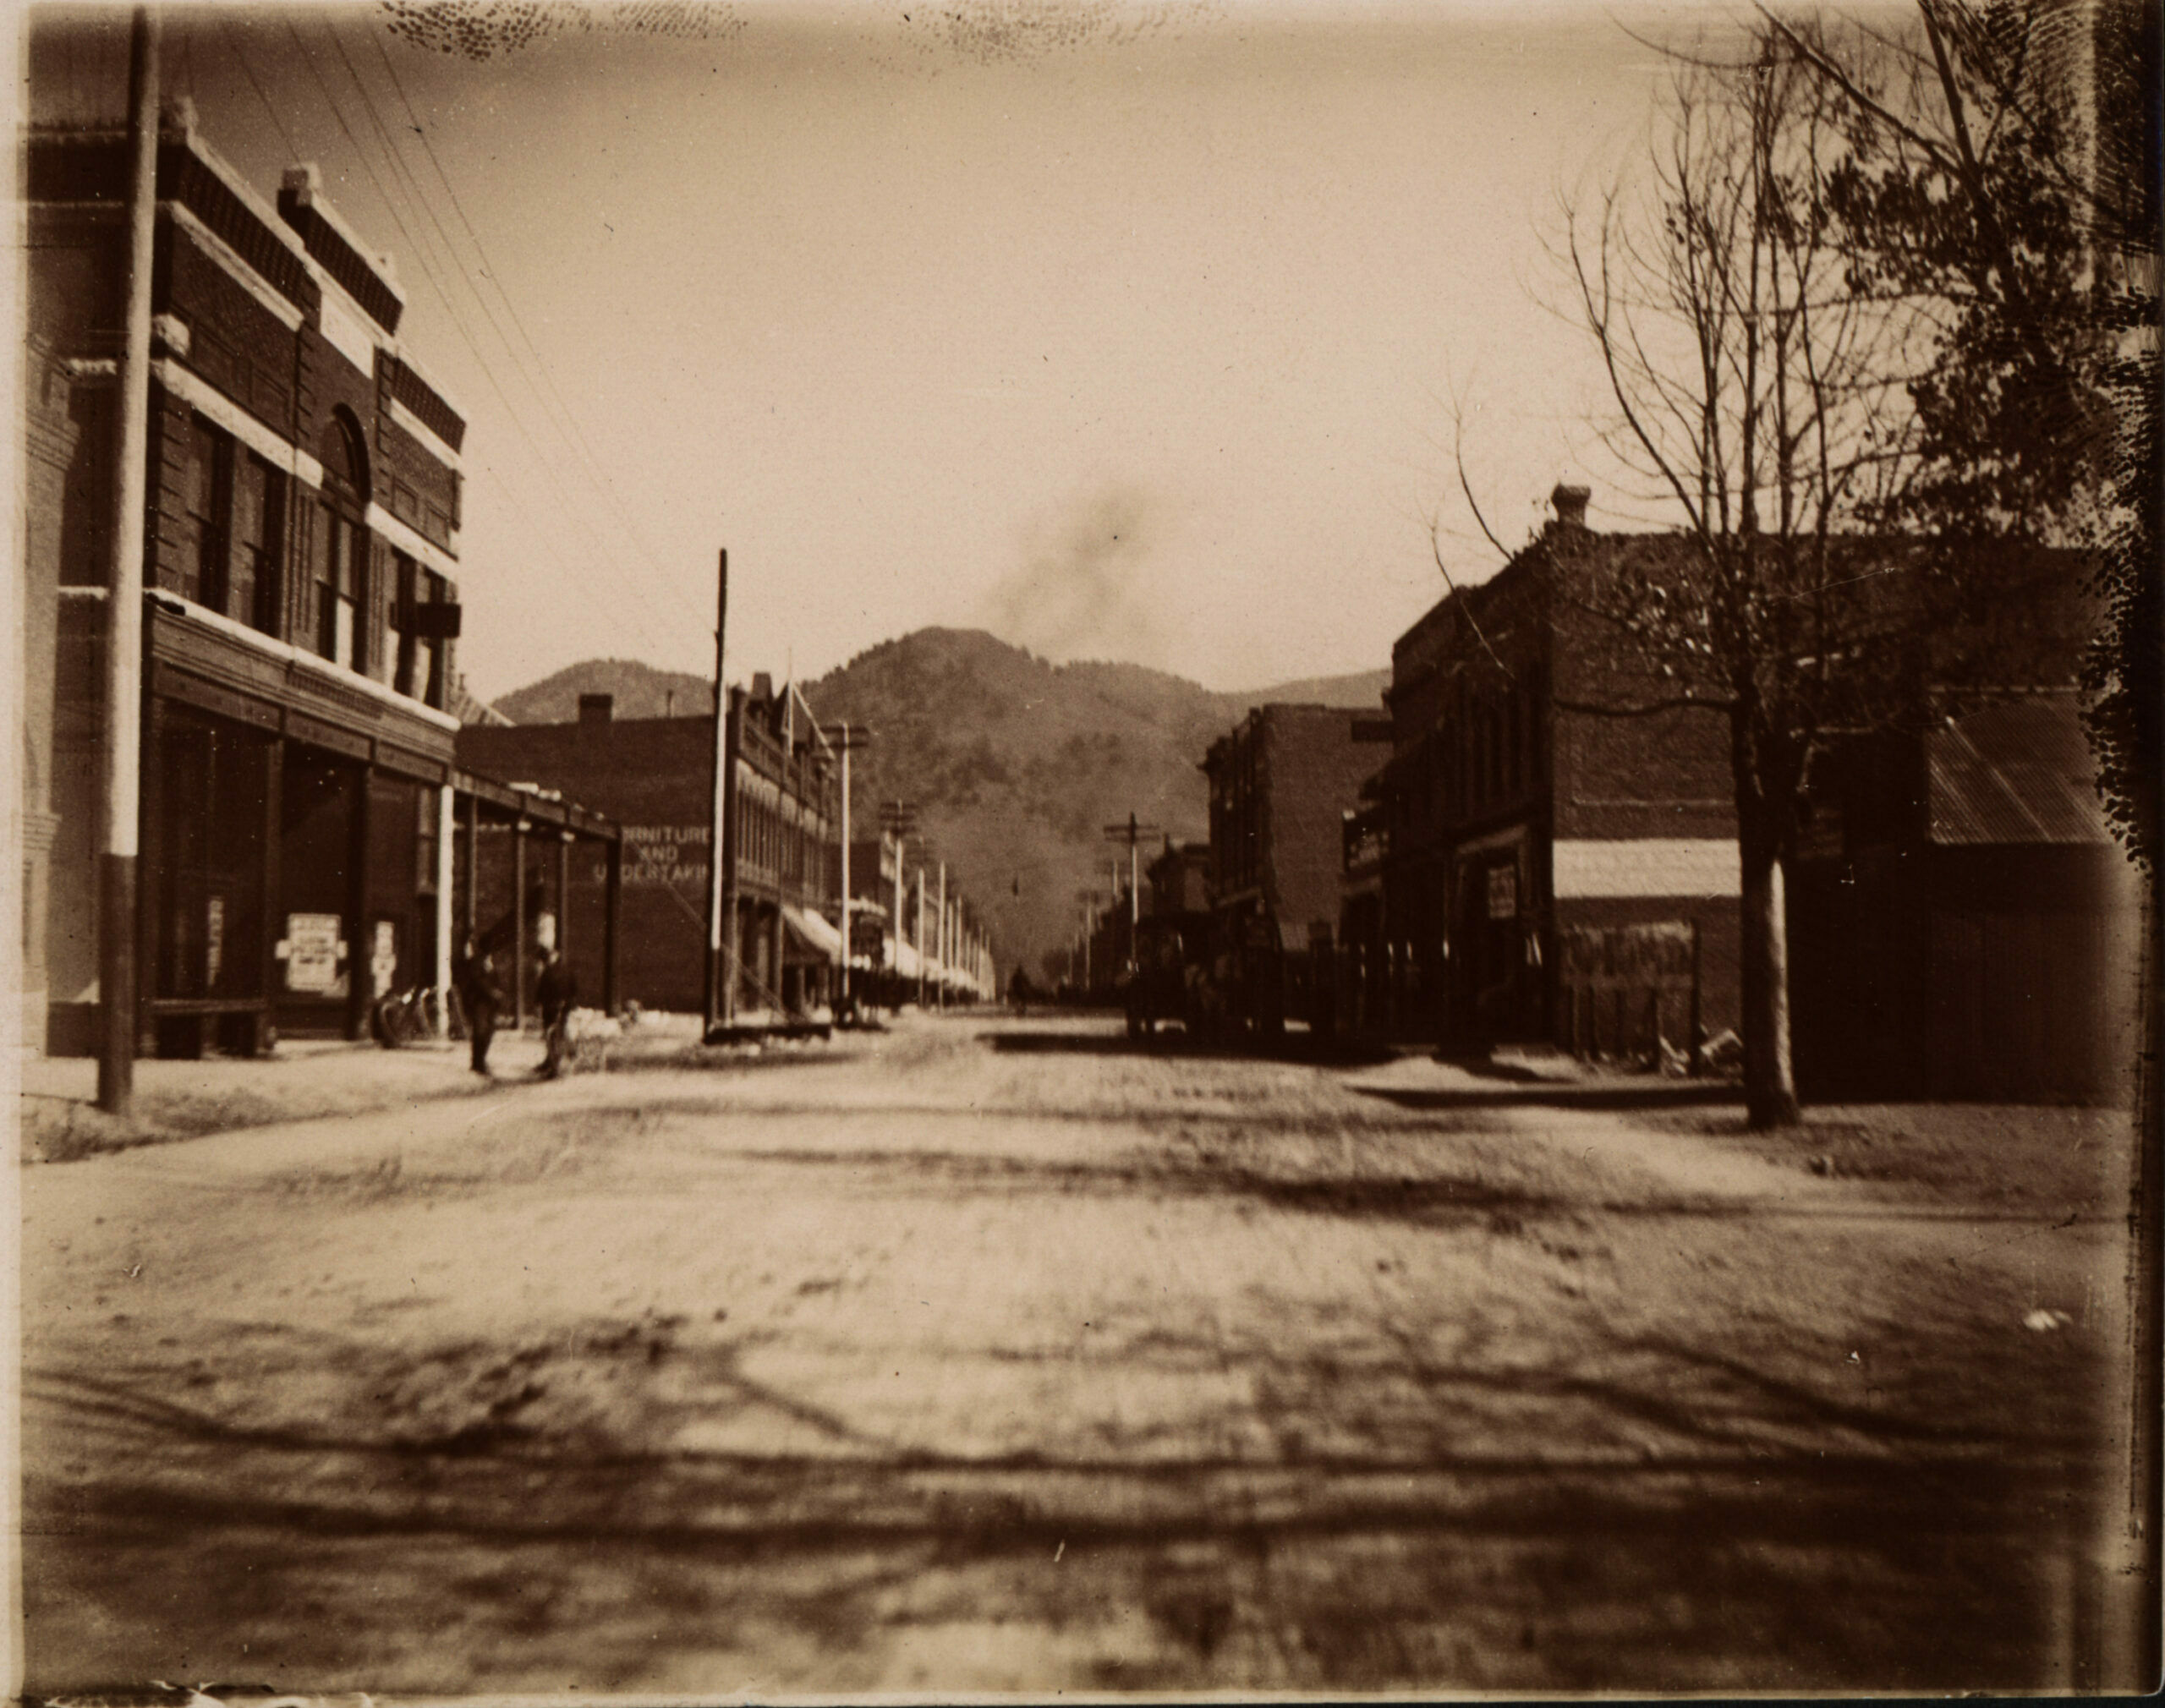 Looking North on F St, before the S was installed on Tenderfoot Mountain in 1932 by the senior Salida High School Class. 'S' is for Spartans.